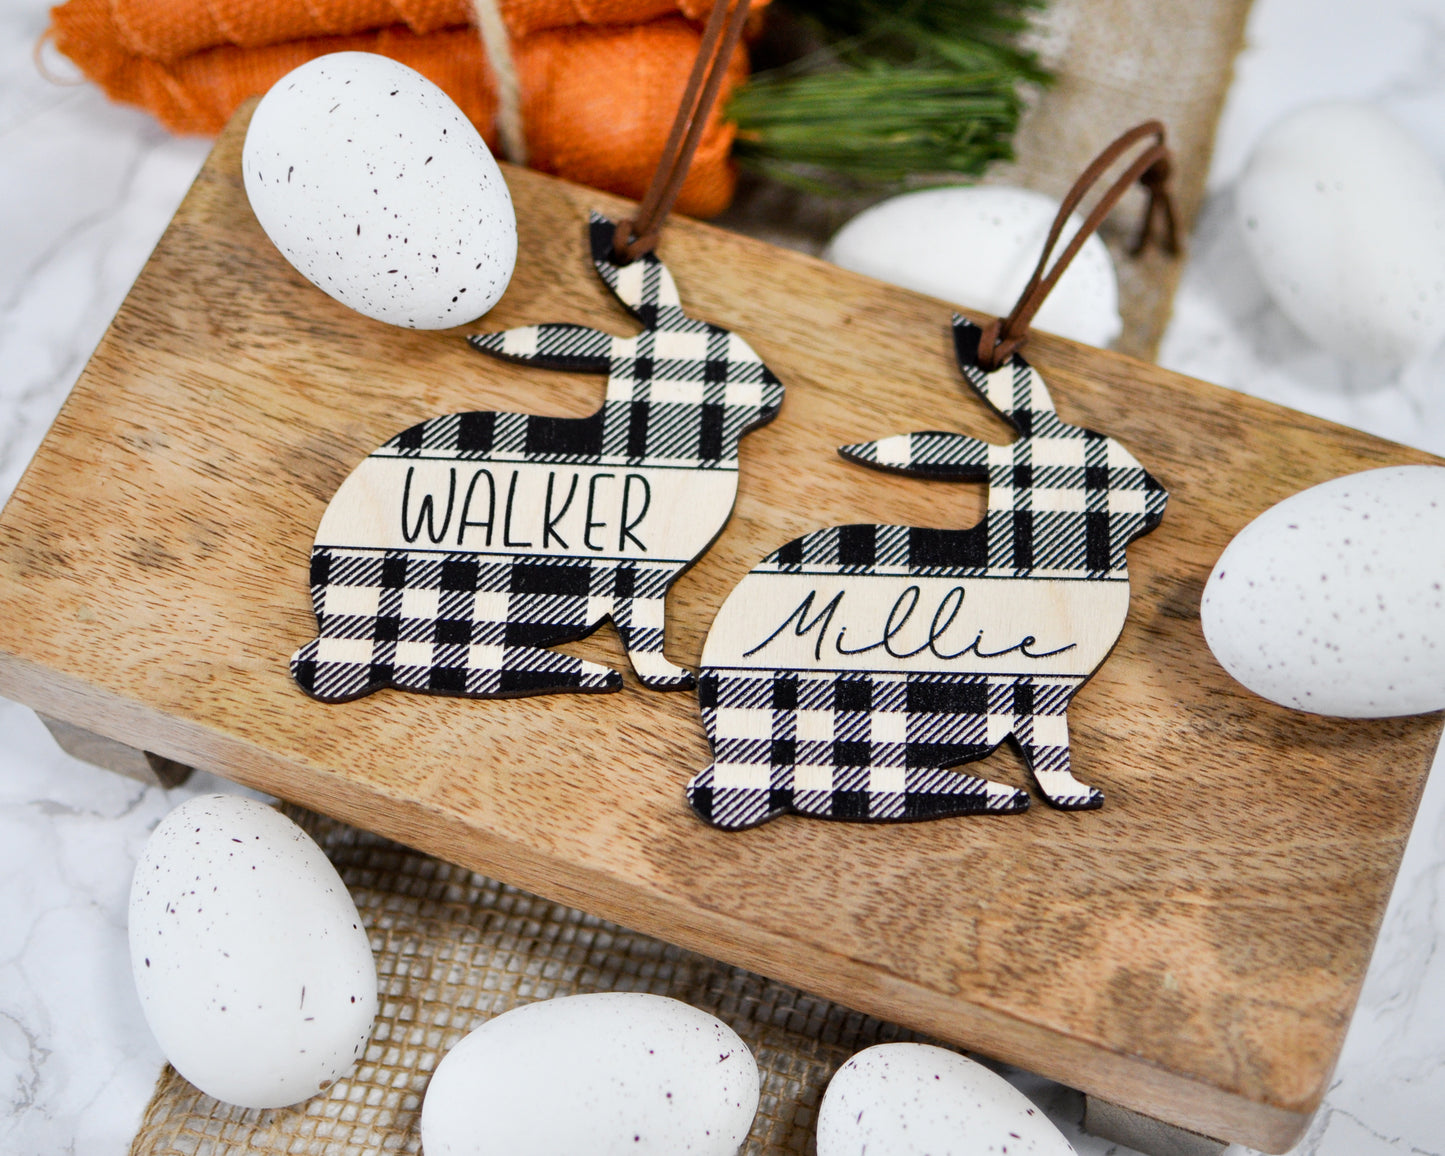 wood black plaid bunny name tags with brown suede cord